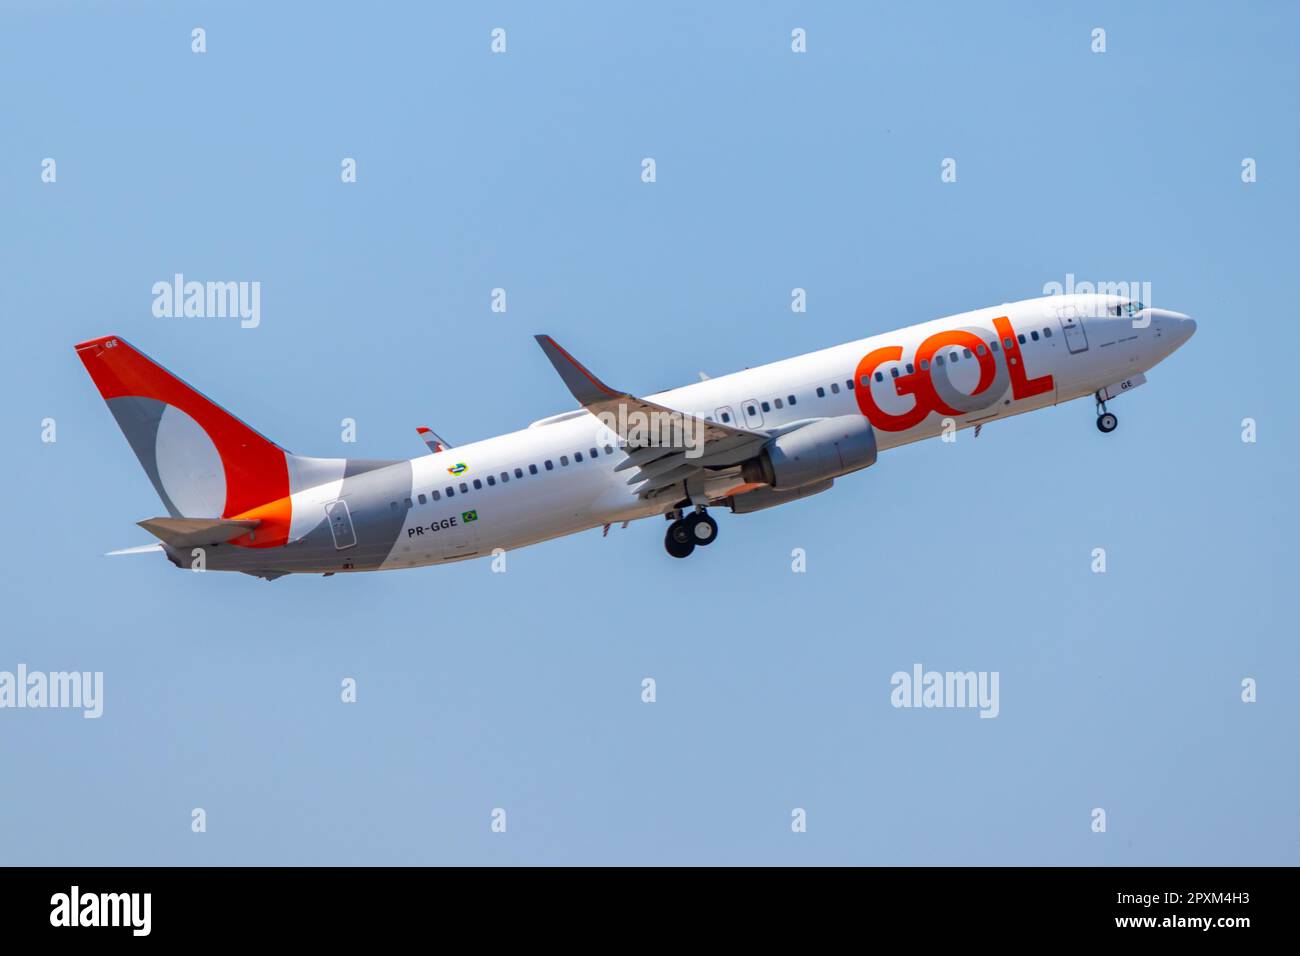 GOL Airlines plane, taking off from Santarem Airport. A Boeing 737-800, registration PR-GGE. Stock Photo